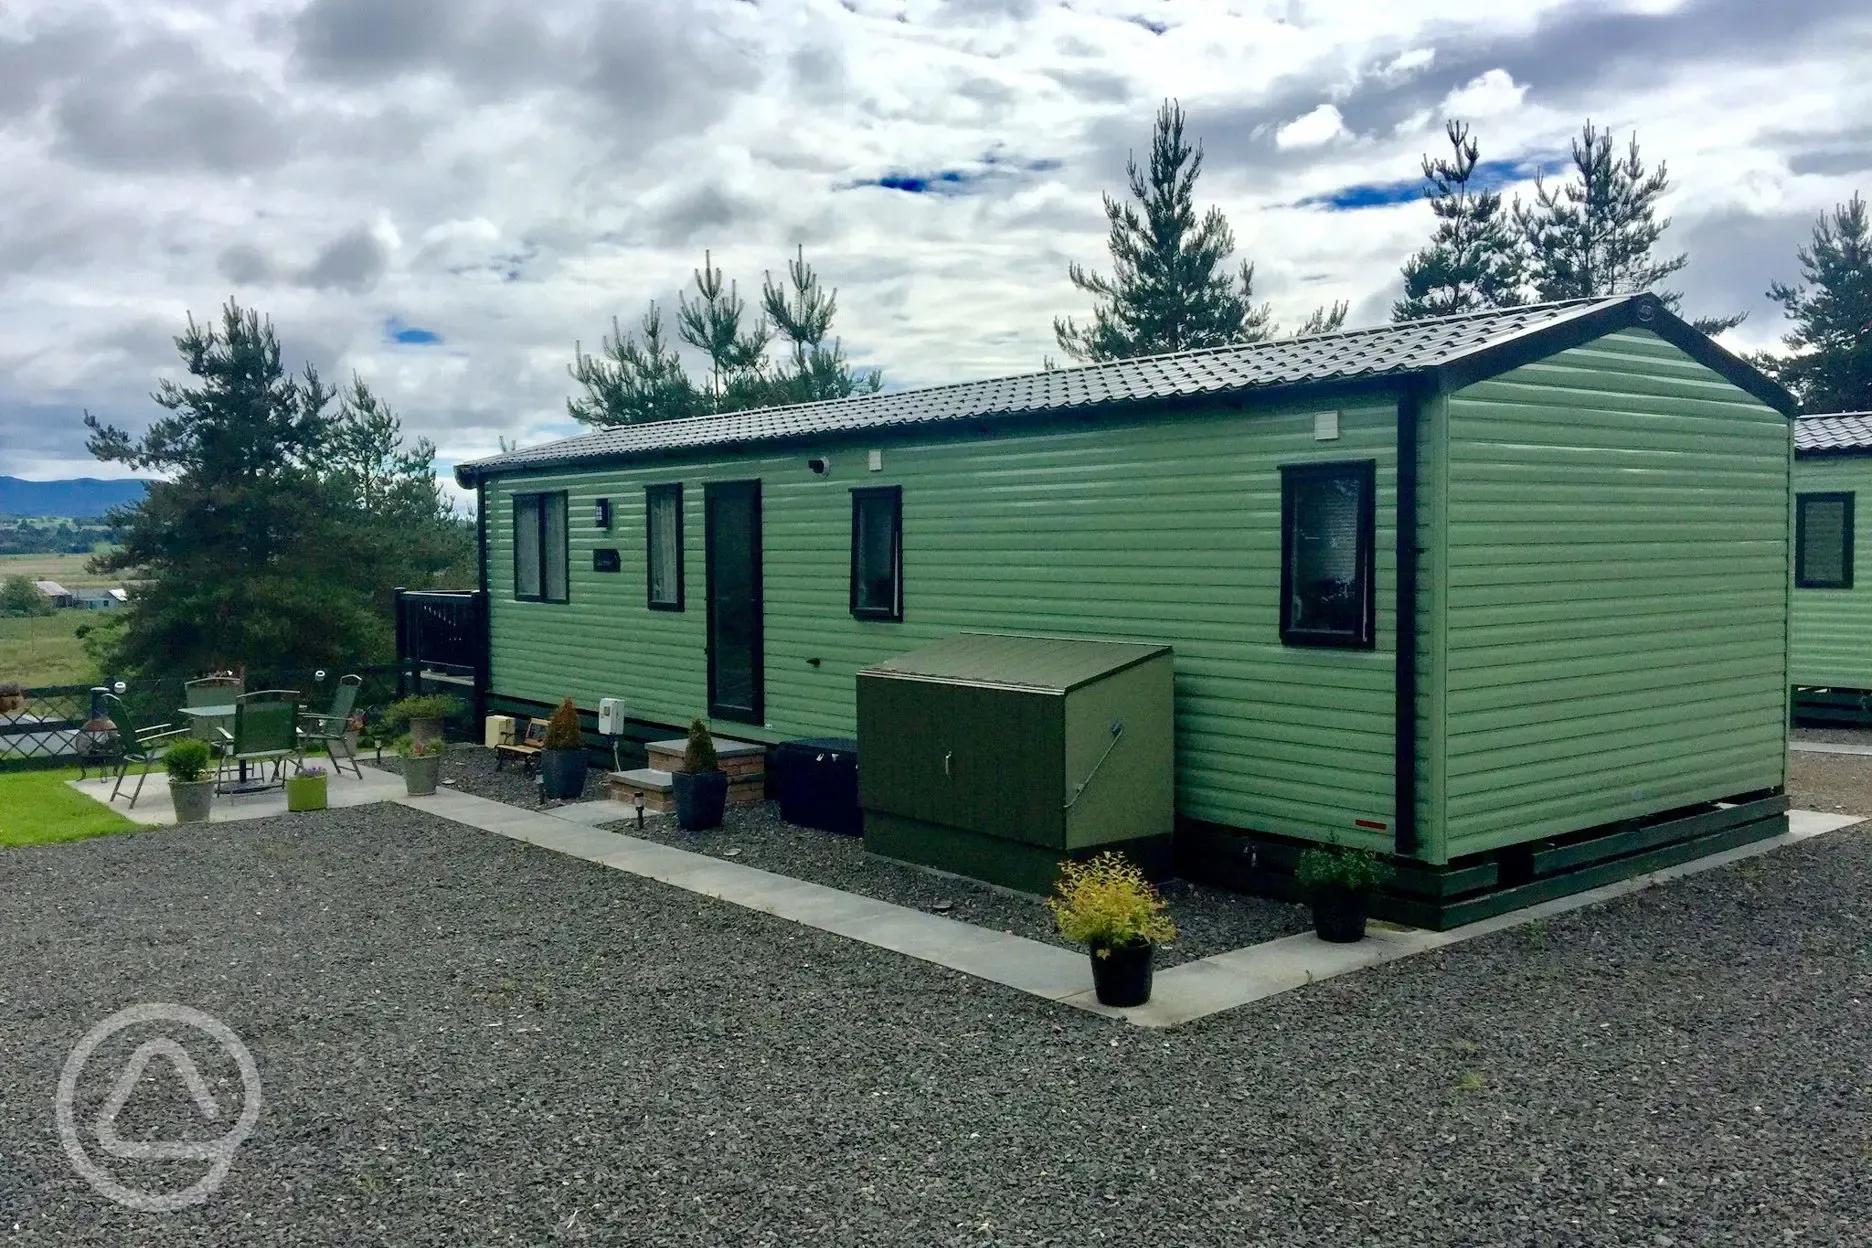 Holiday homes at Trossachs Holiday Park